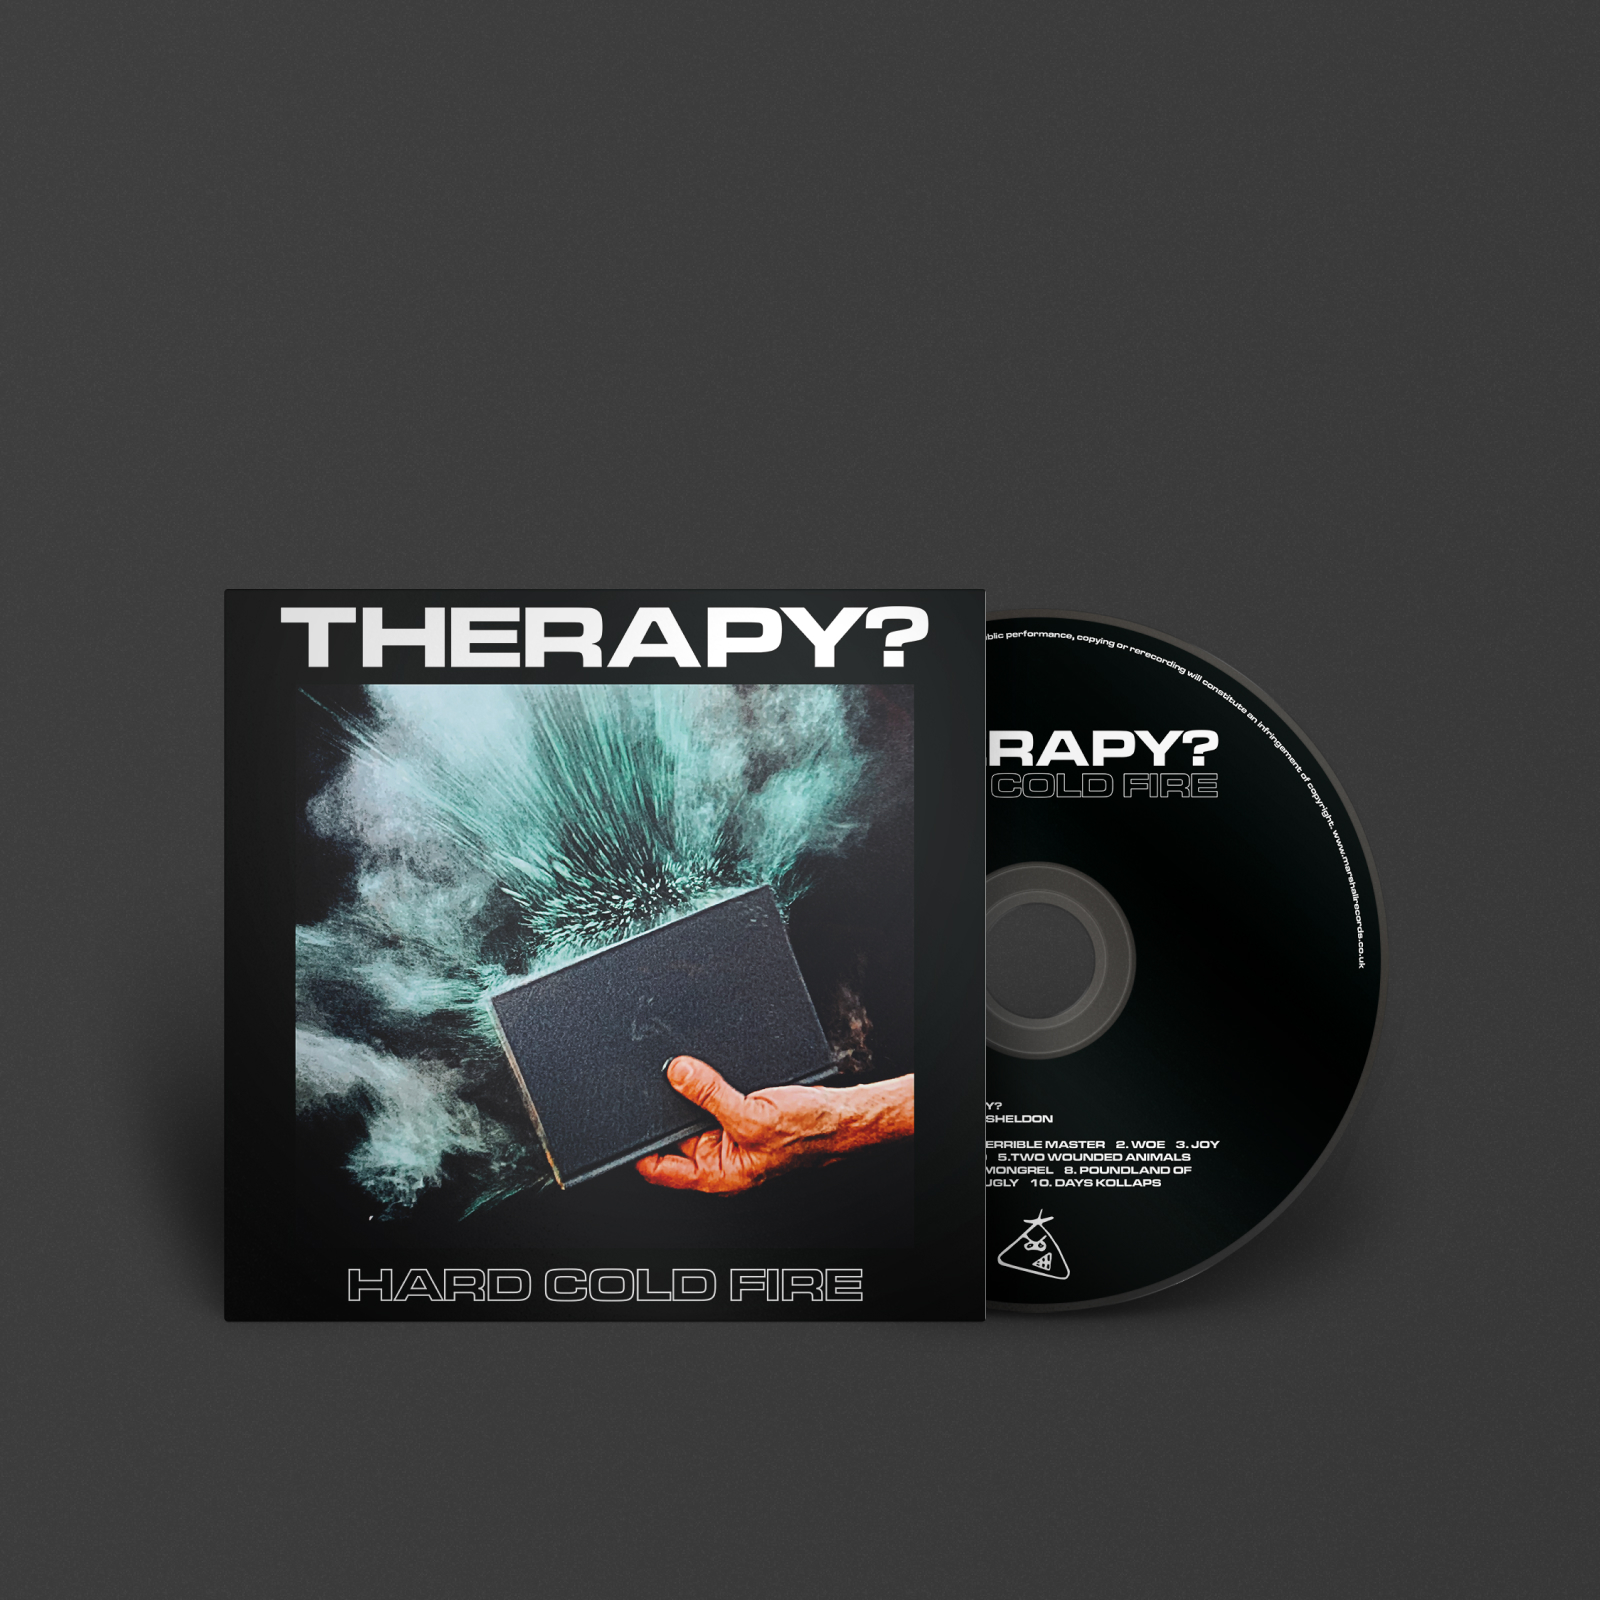 'Hard Cold Fire' CD by the band 'Therapy?'